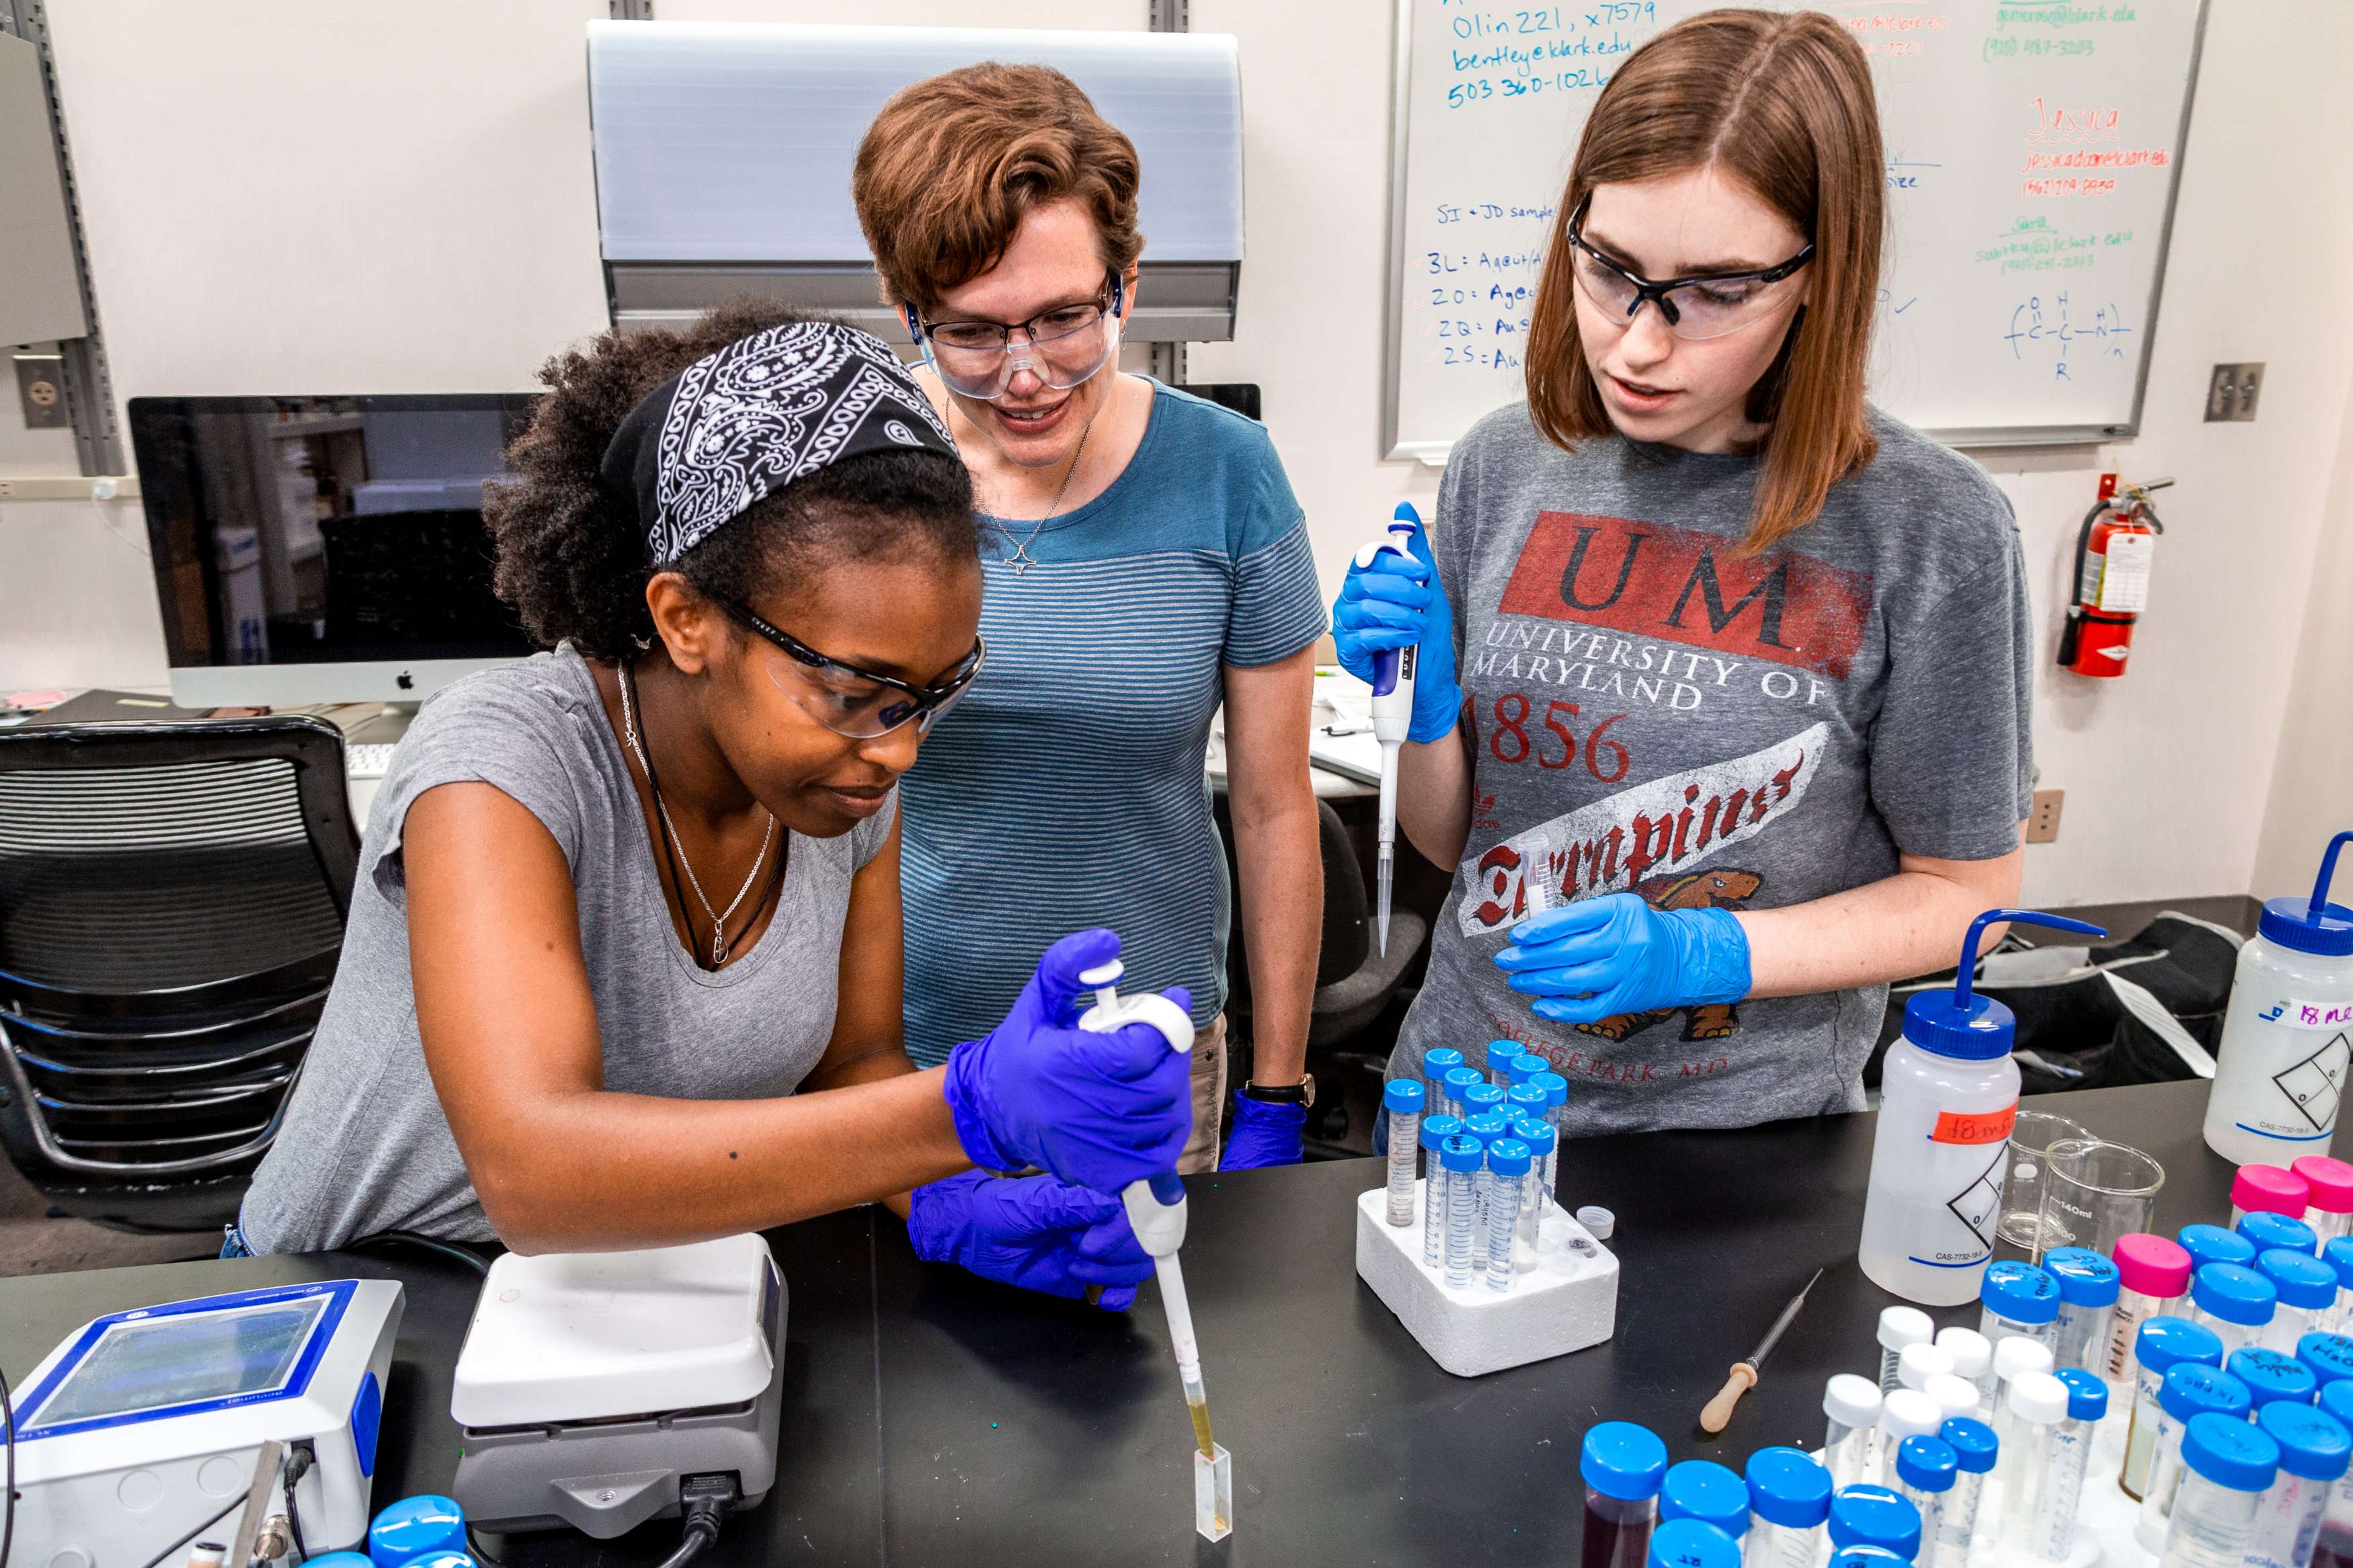 Three female college students doing research in a classroom wearing gloves and protective eyewear